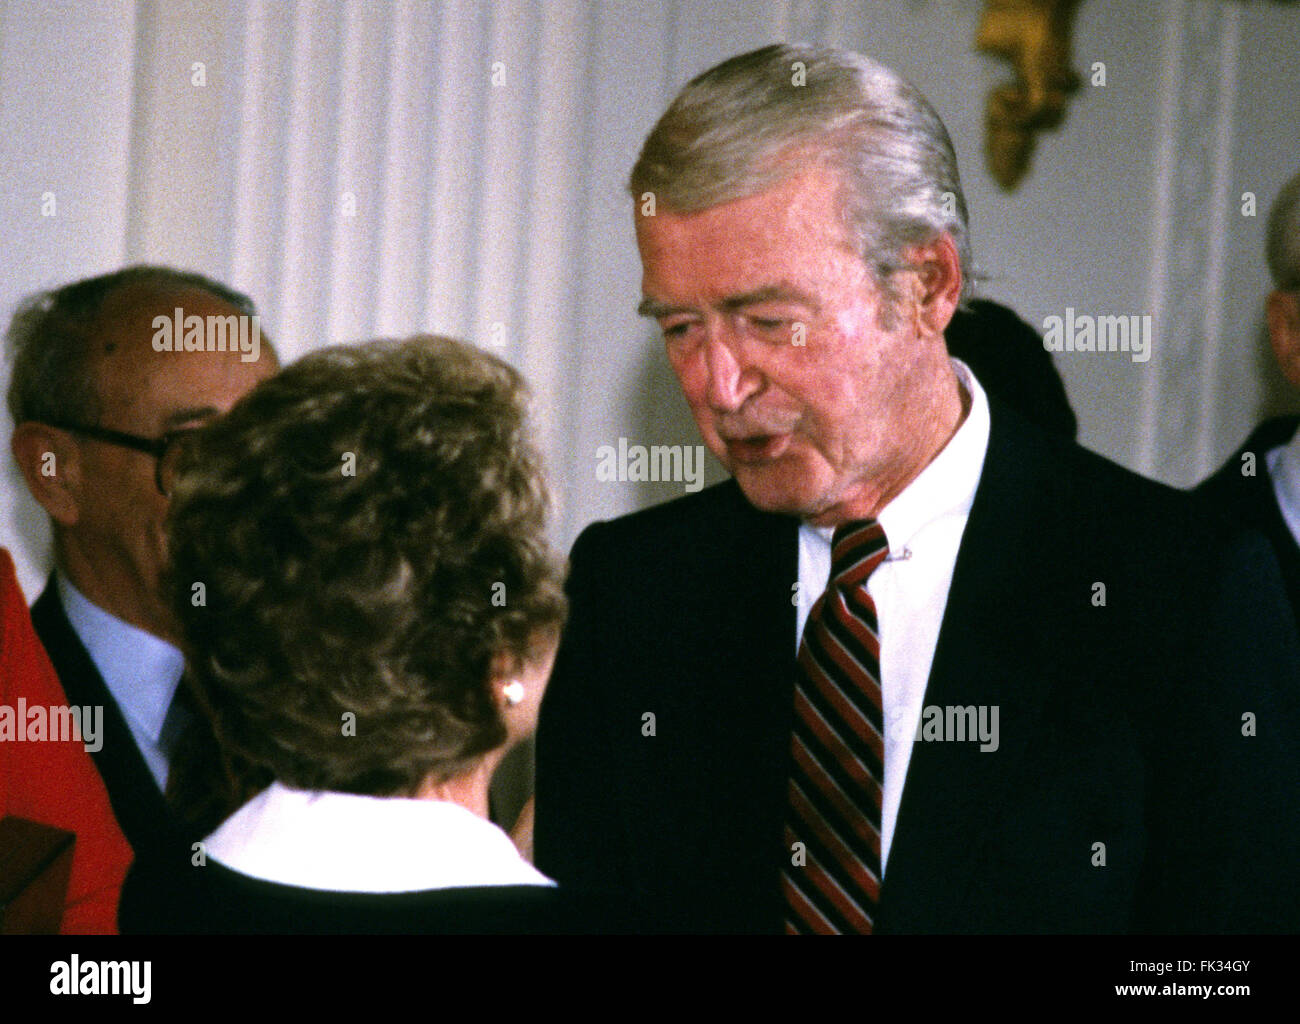 Washington, District of Columbia, USA. 23rd May, 1985. First lady Nancy Reagan congratulates actor Jimmy Stewart after he received the Presidential Medal of Freedom from United States President Ronald Reagan during a ceremony in the East Room of the White House in Washington, DC on May 23, 1985.Credit: Arnie Sachs/CNP © Arnie Sachs/CNP/ZUMA Wire/Alamy Live News Stock Photo